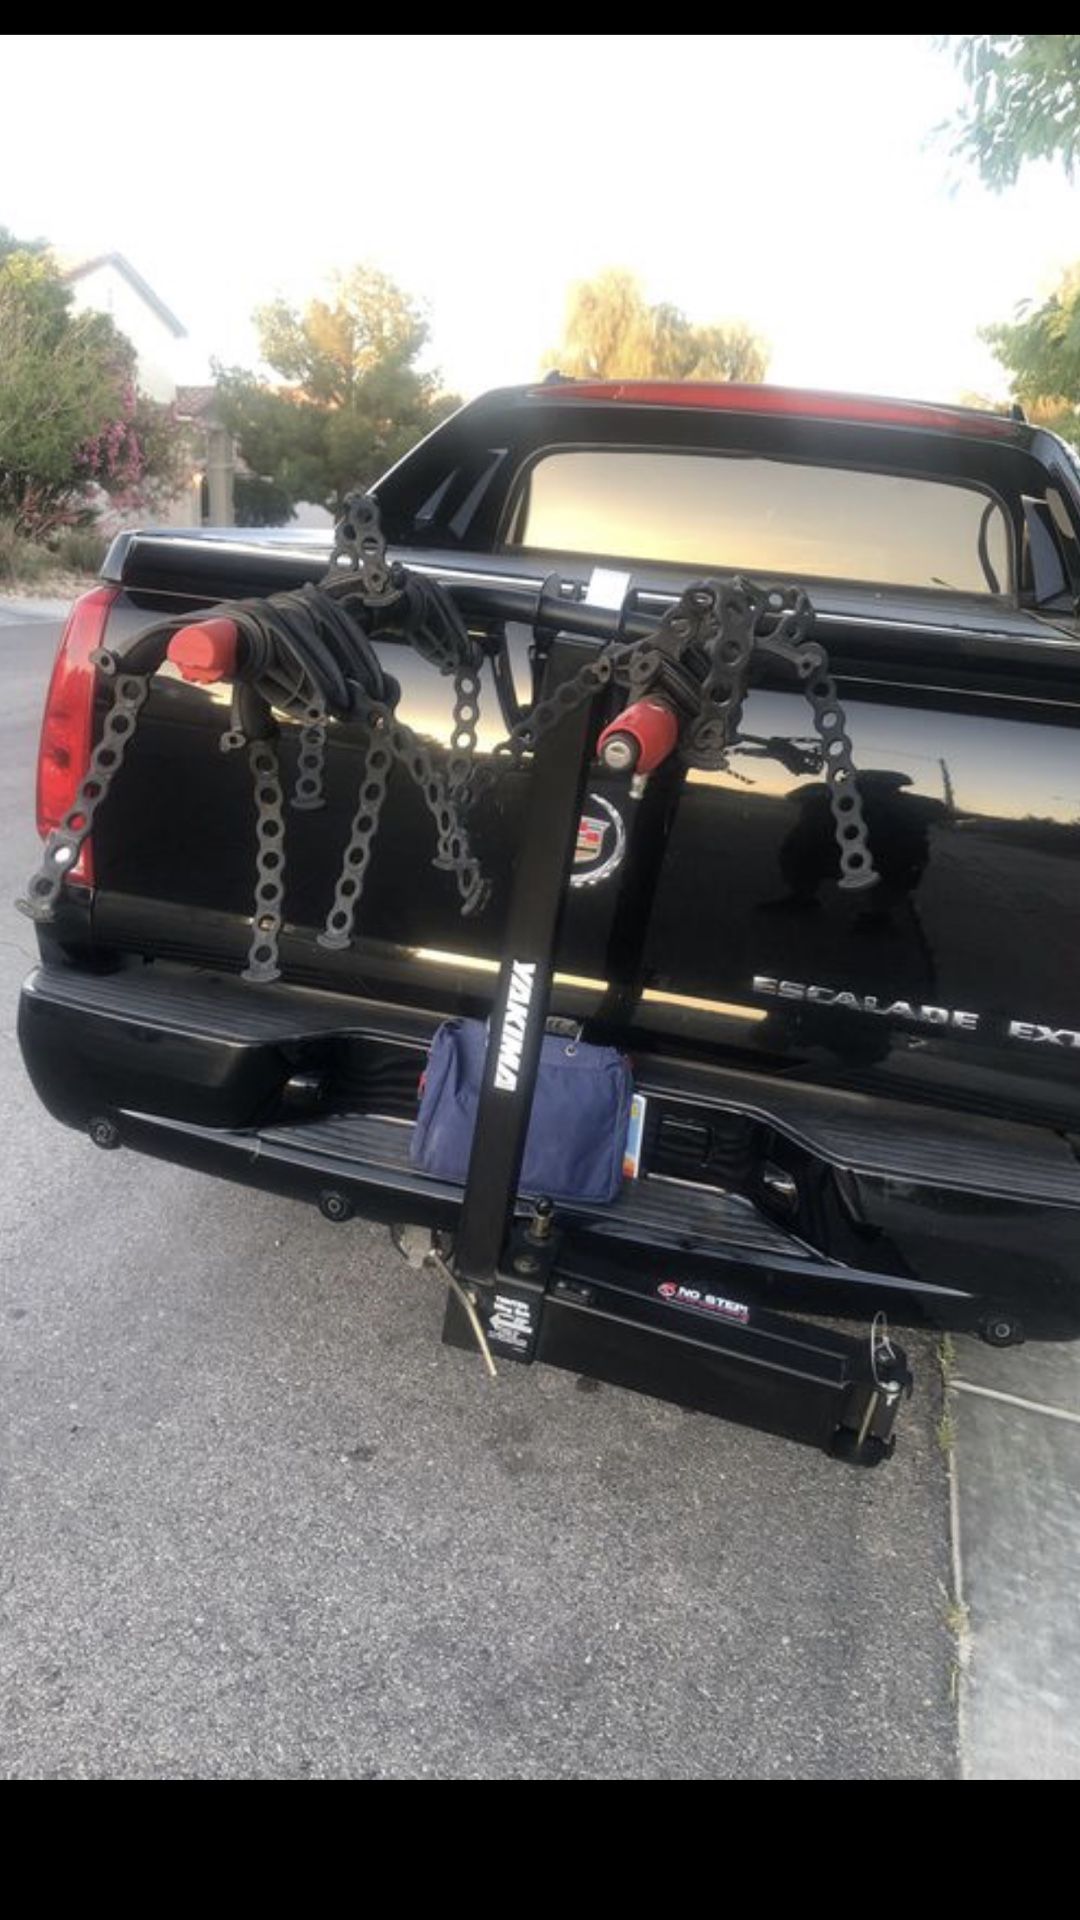 Yakima 4 Bike Rack Hitch 2” Swings away from car with bikes loaded to provide easy access to rear of vehicle Simmons and Ann road